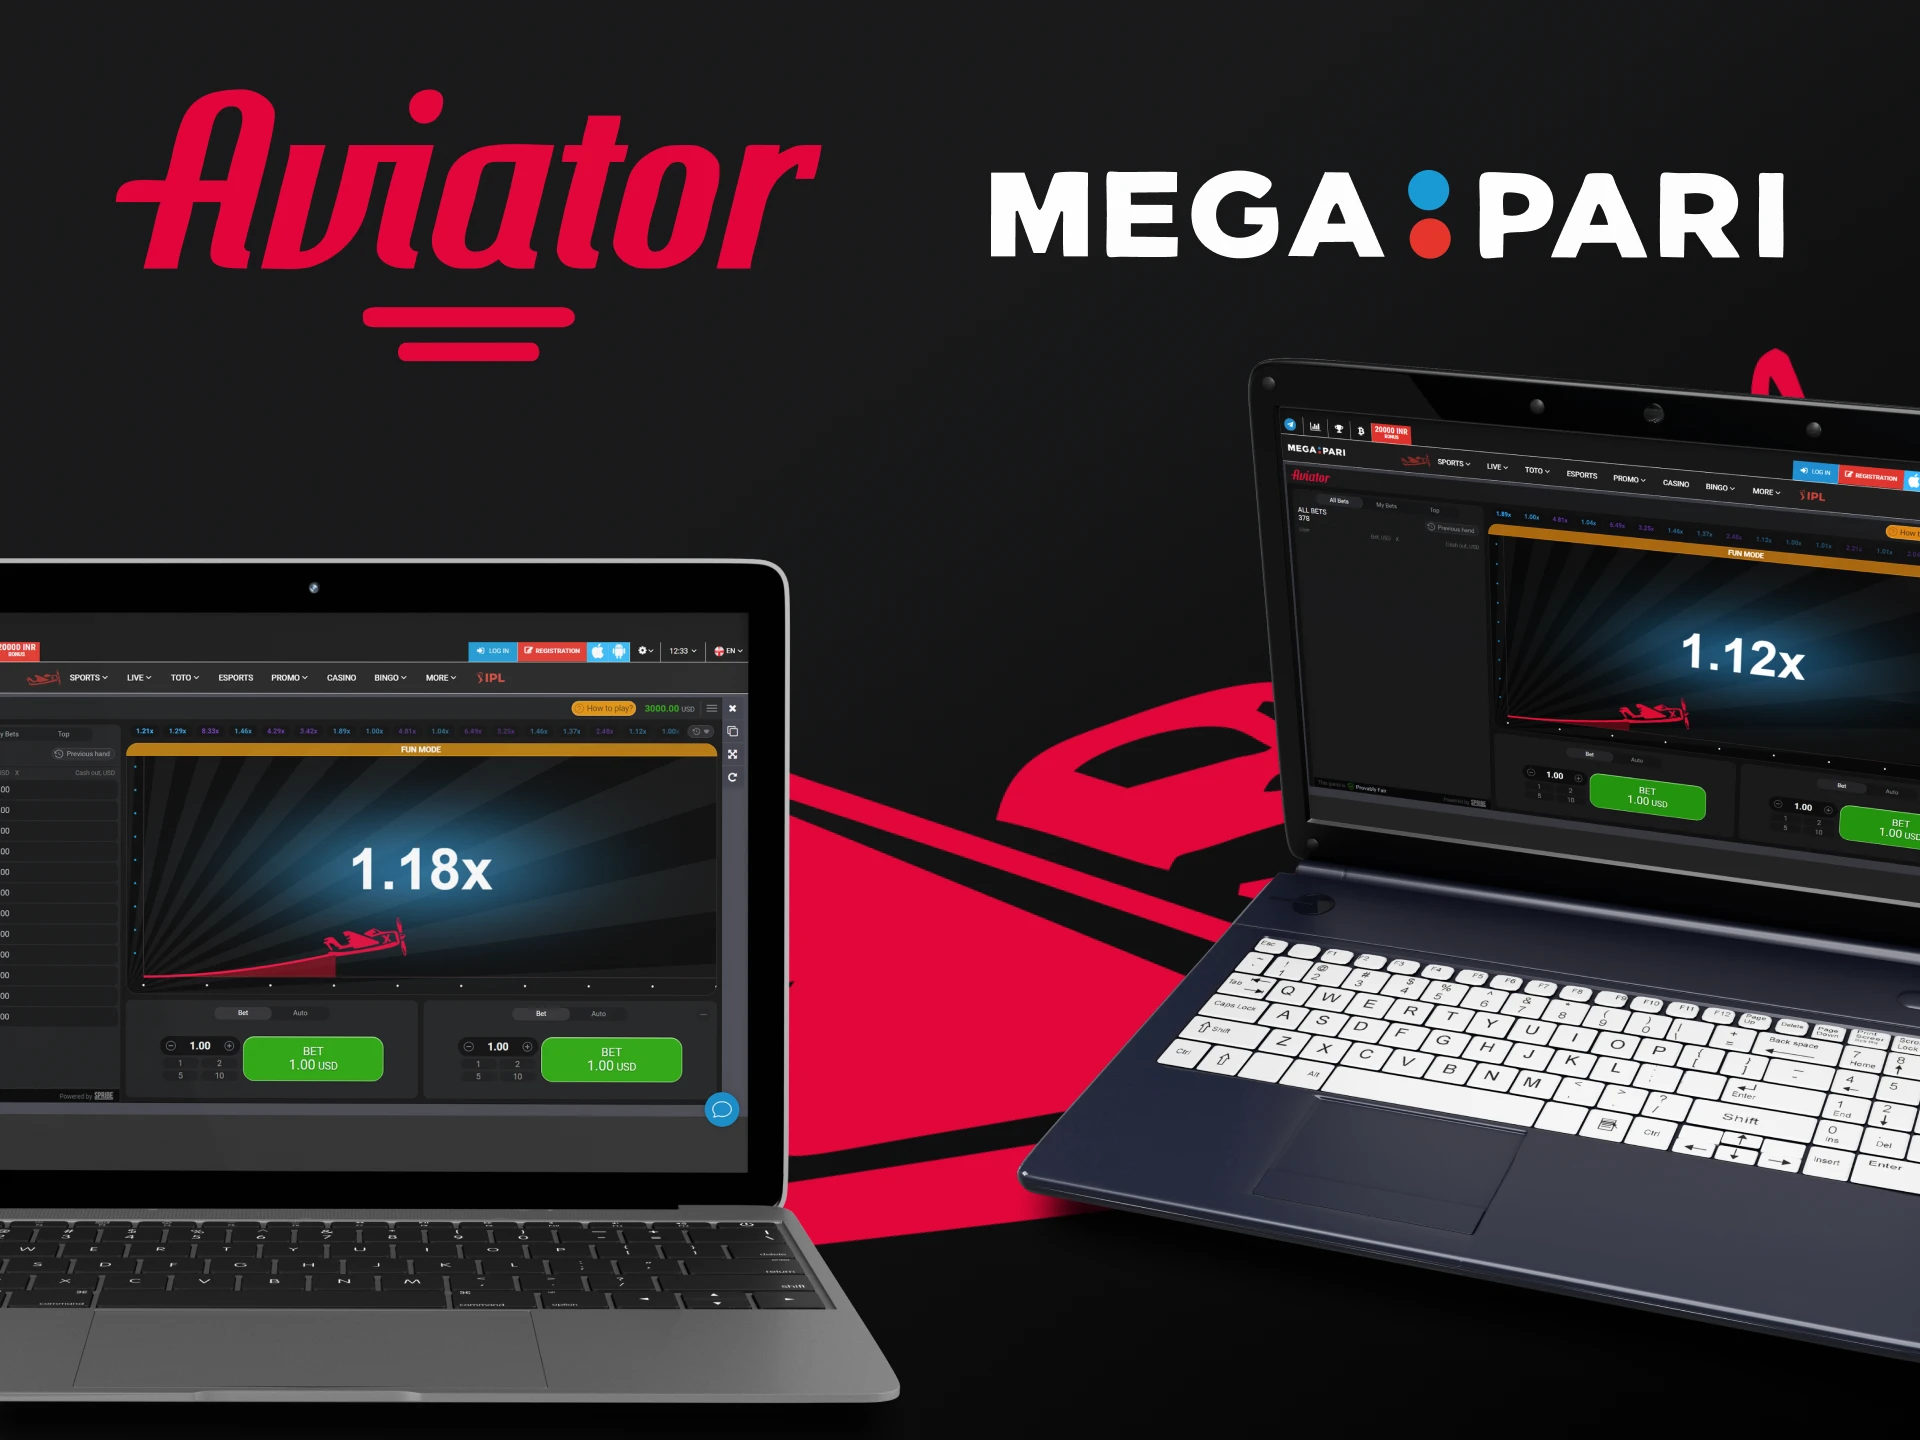 Find out the advantages of each device for playing Aviator on Megapari.